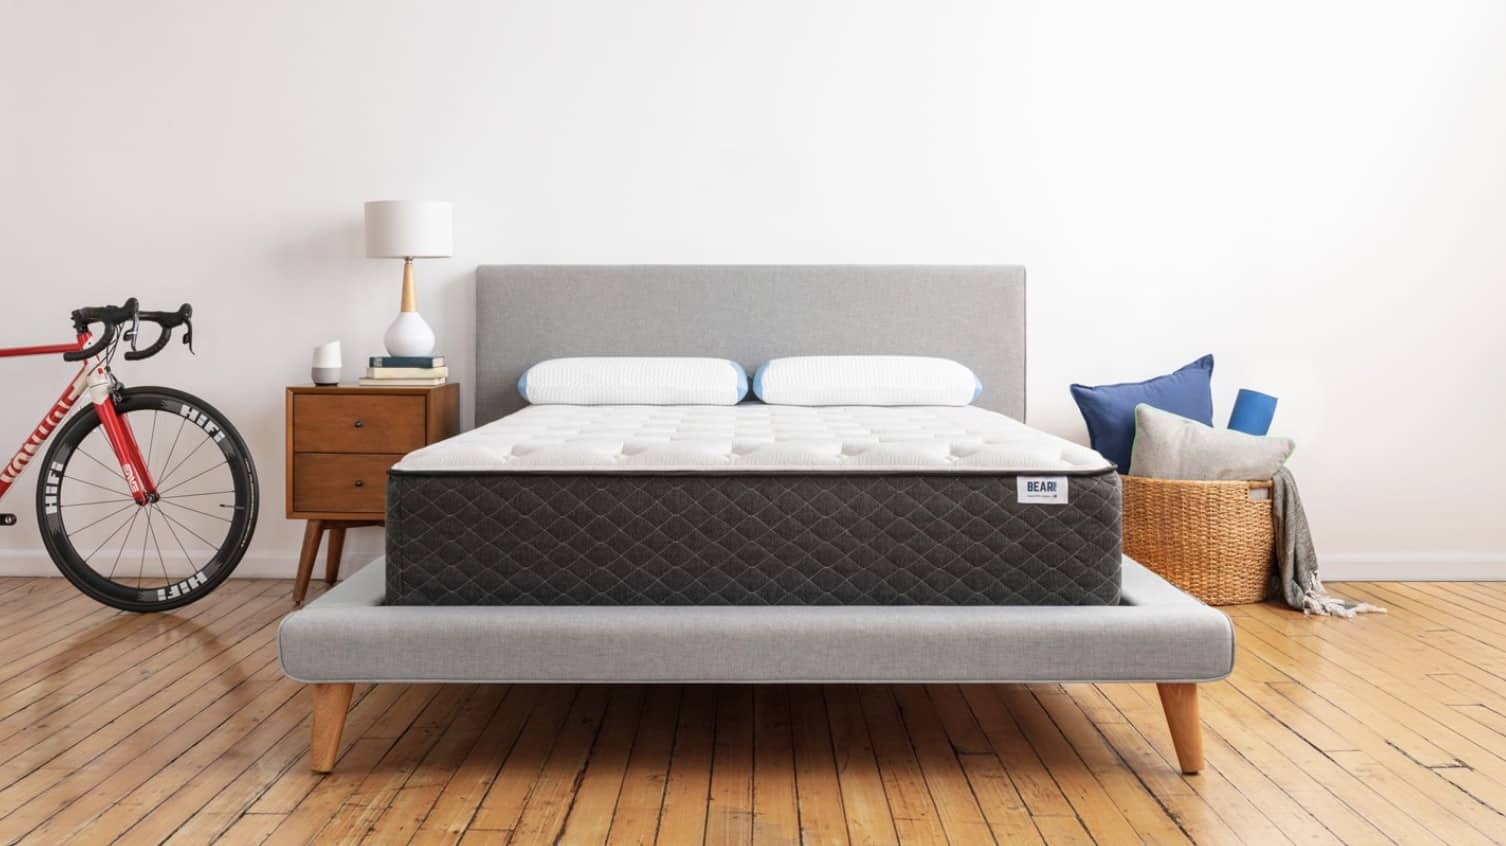 Important Factors to Consider When Buying a Bed Online